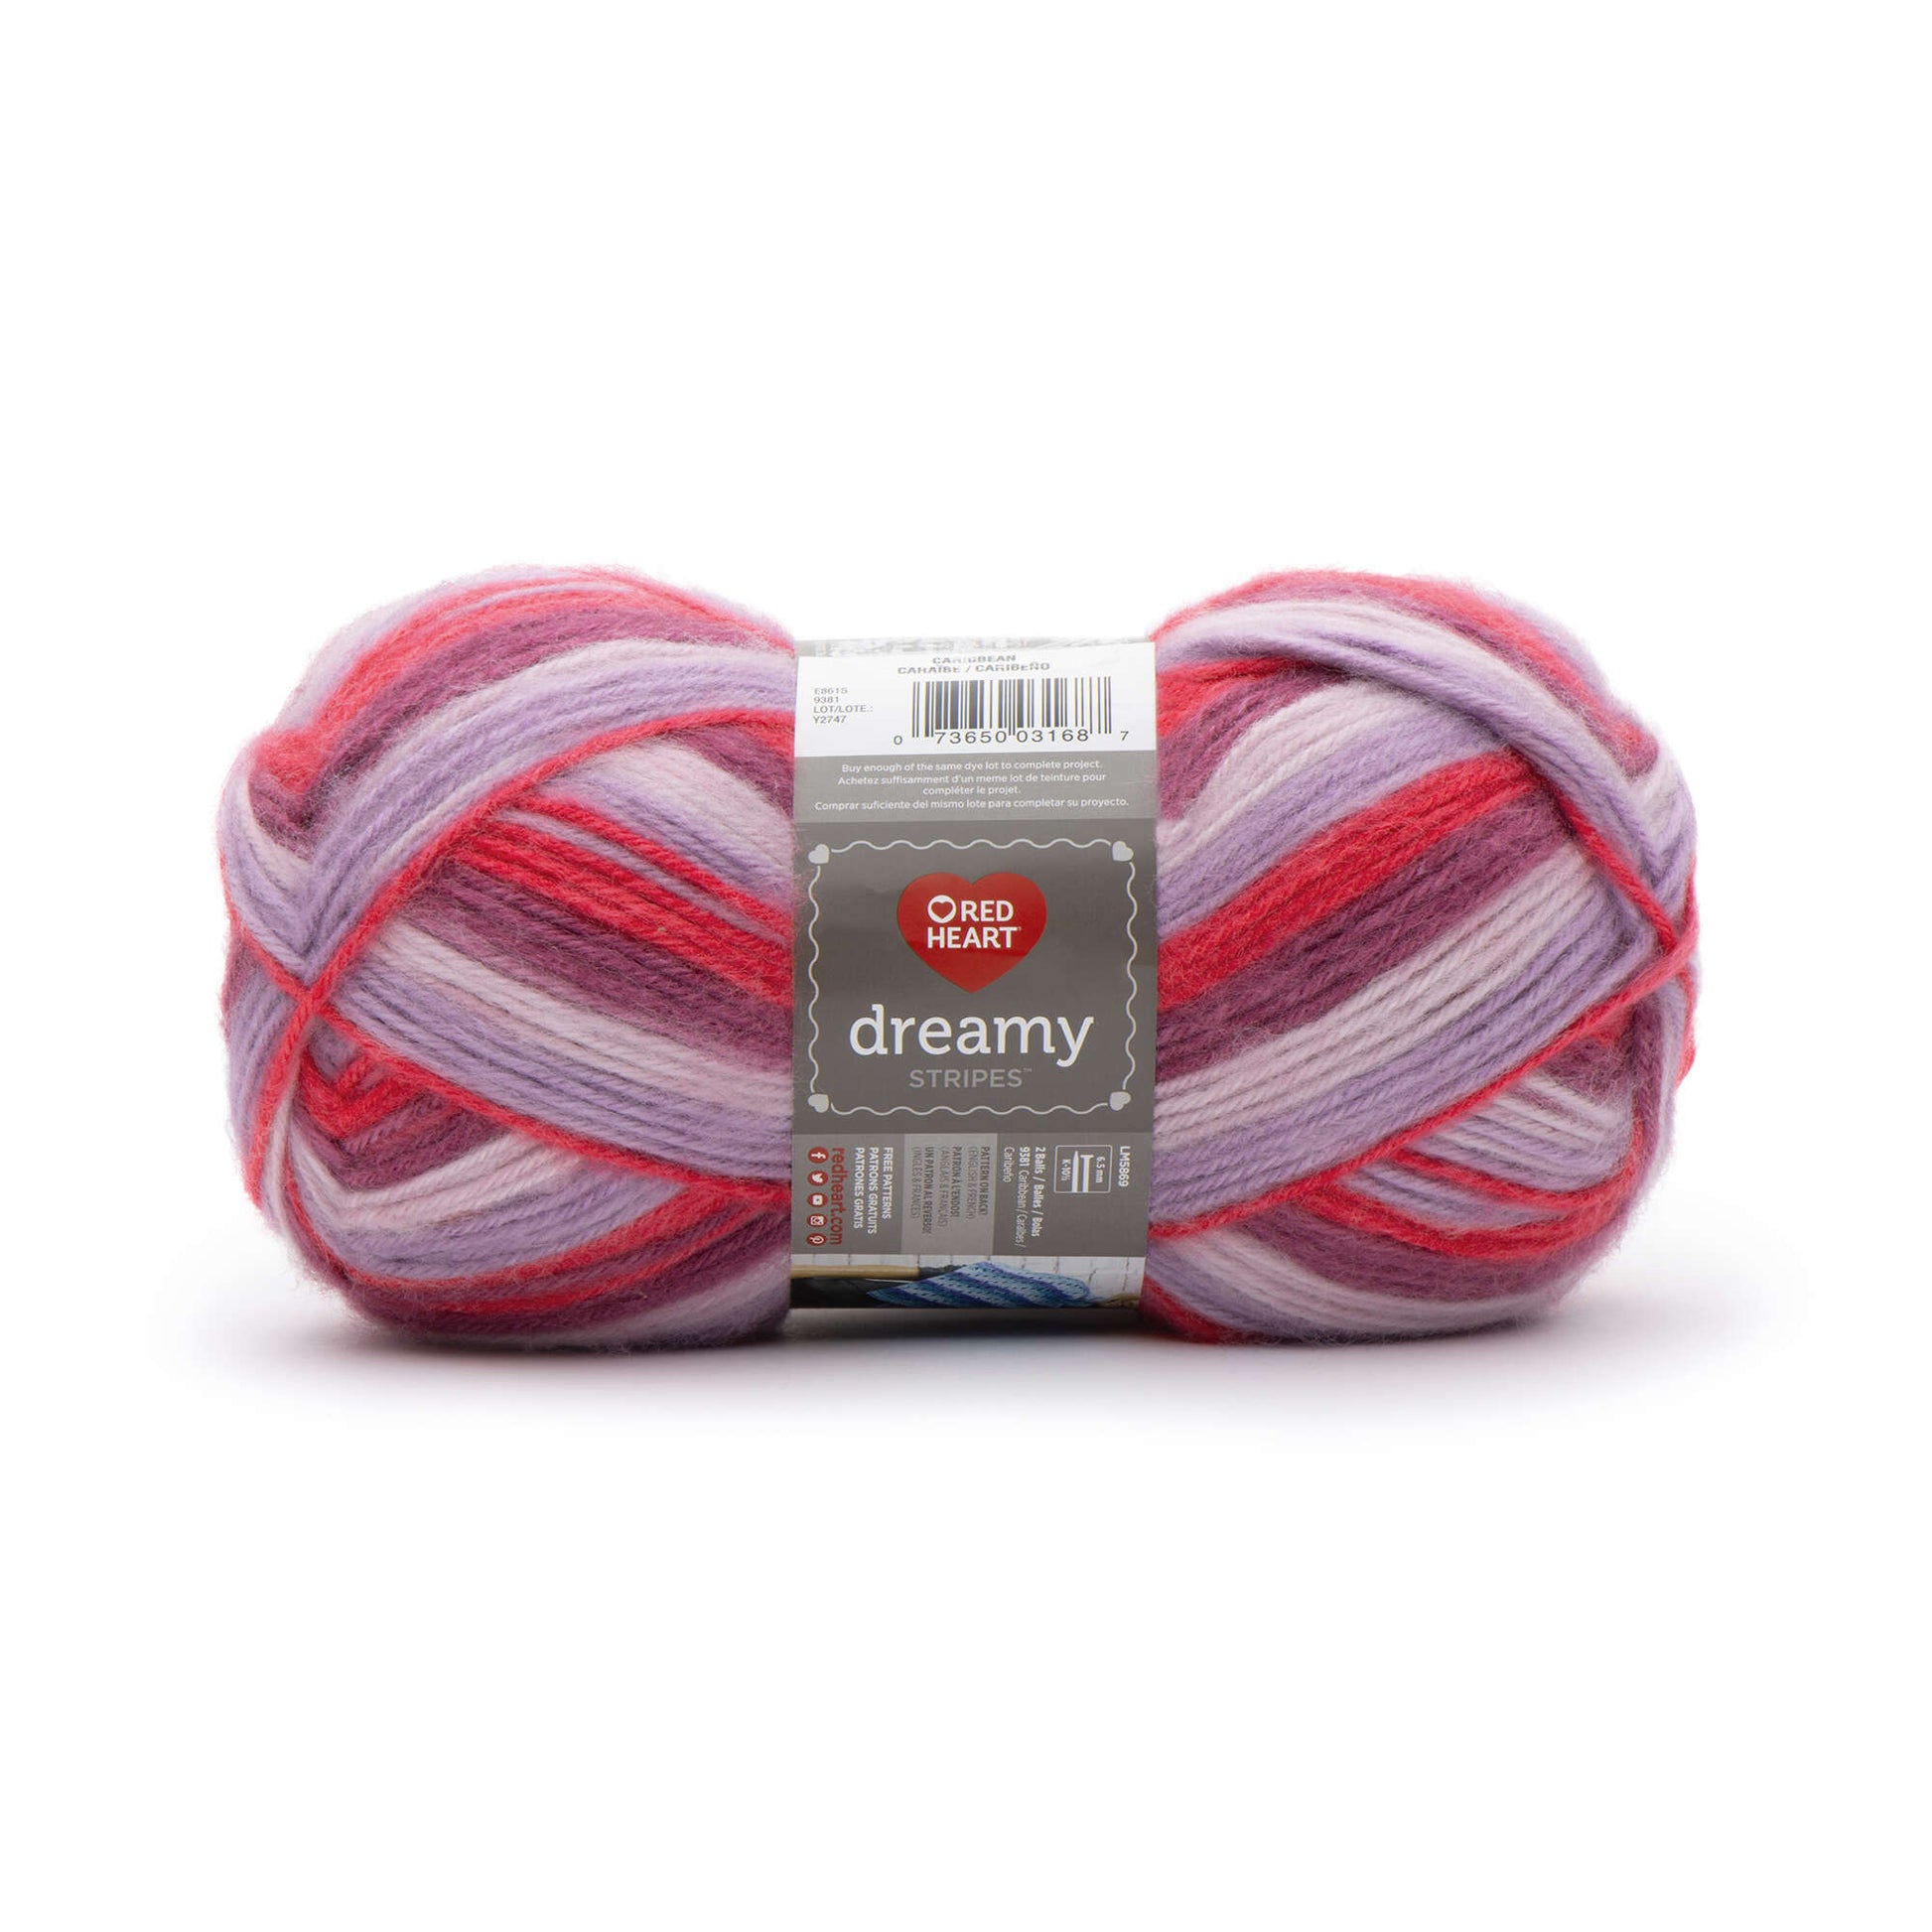 Red Heart Dreamy Stripes Yarn - Discontinued Shades